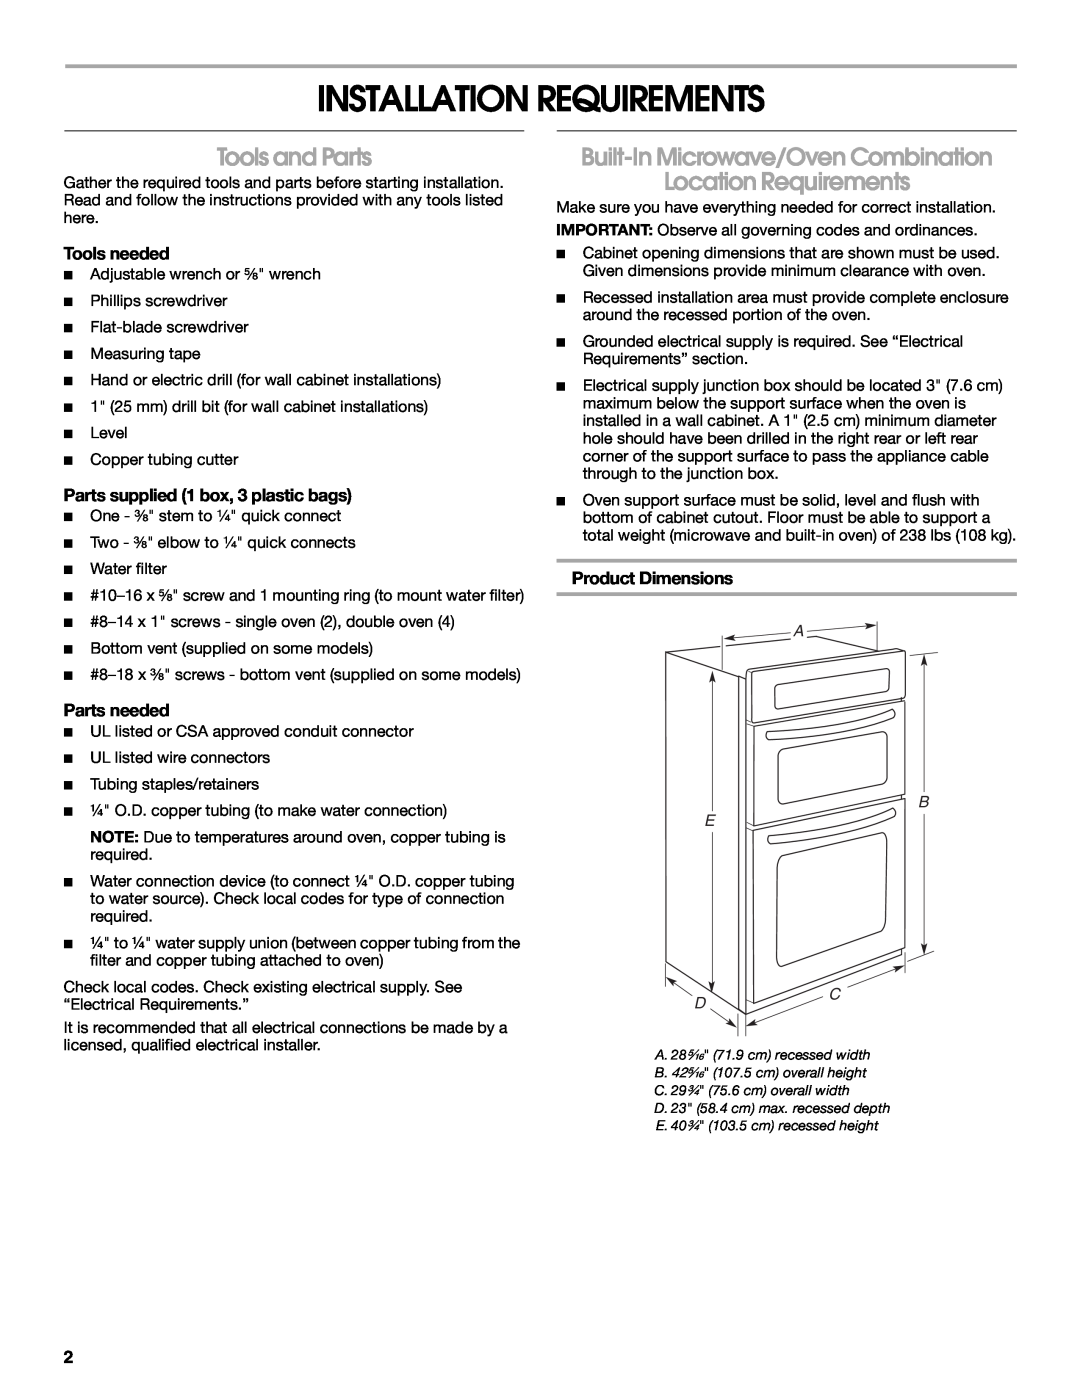 Whirlpool KEHU309SSS Installation Requirements, Tools and Parts, Built-In Microwave/Oven Combination Location Requirements 